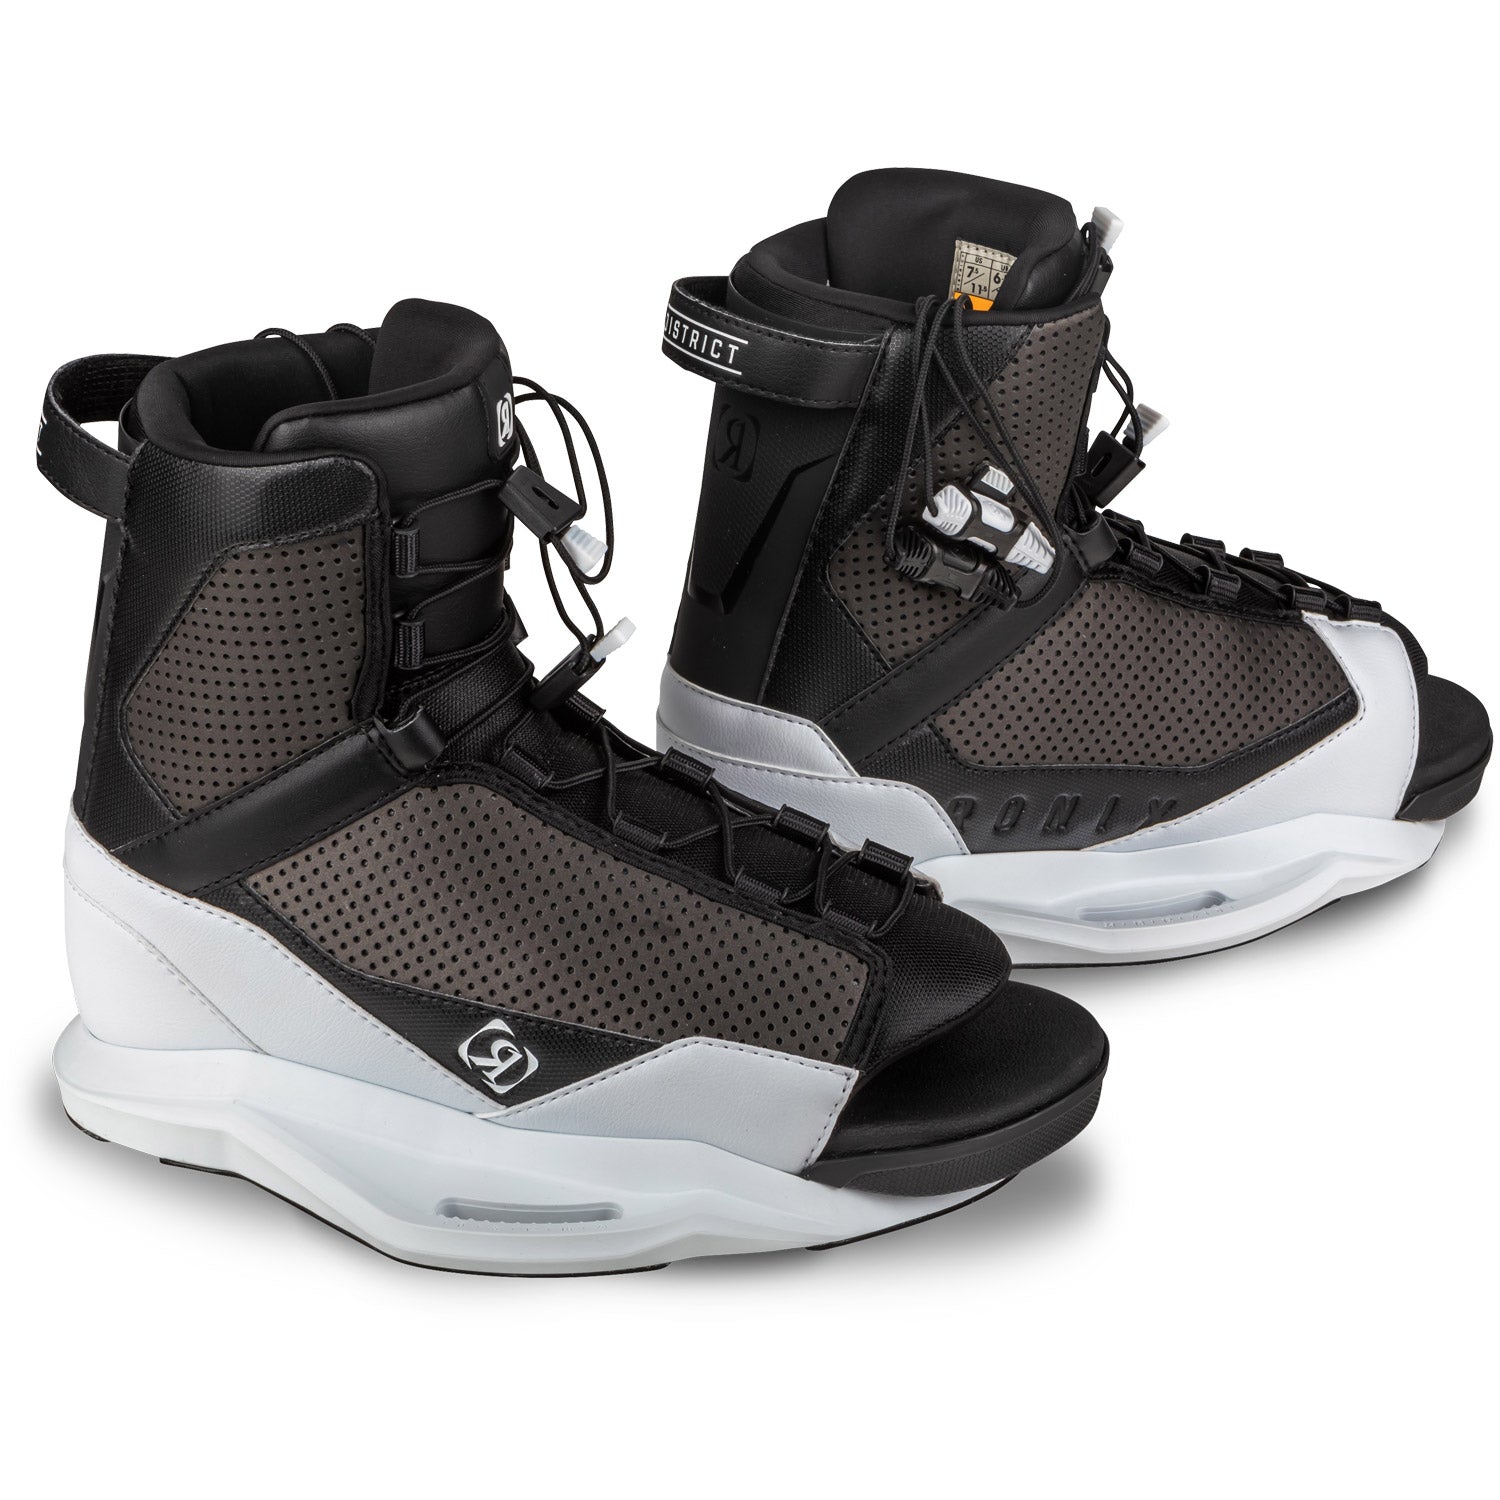 District Mens Wakeboard Boots